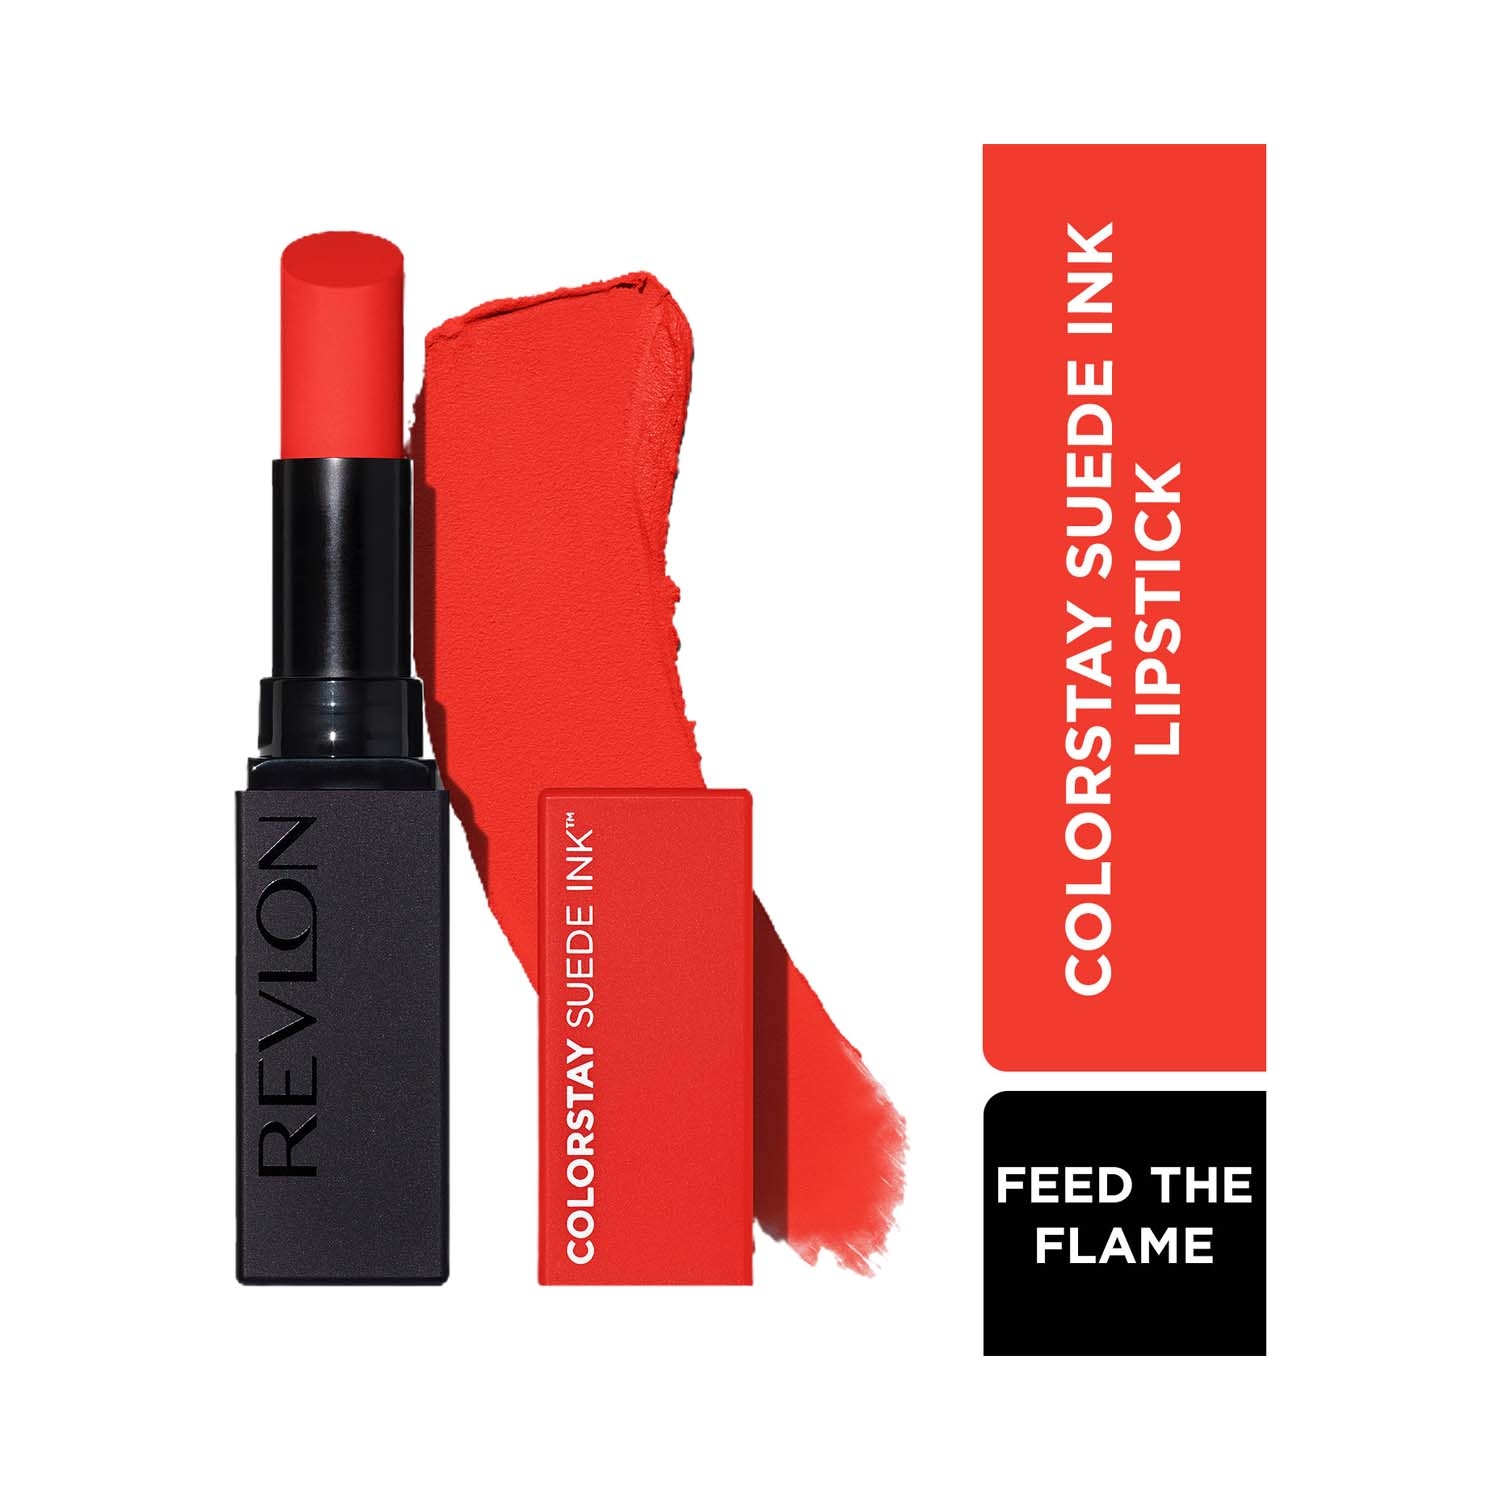 Revlon | Revlon Colorstay Suede Ink Lipstick - 007 Feed The Flame (2.5g)